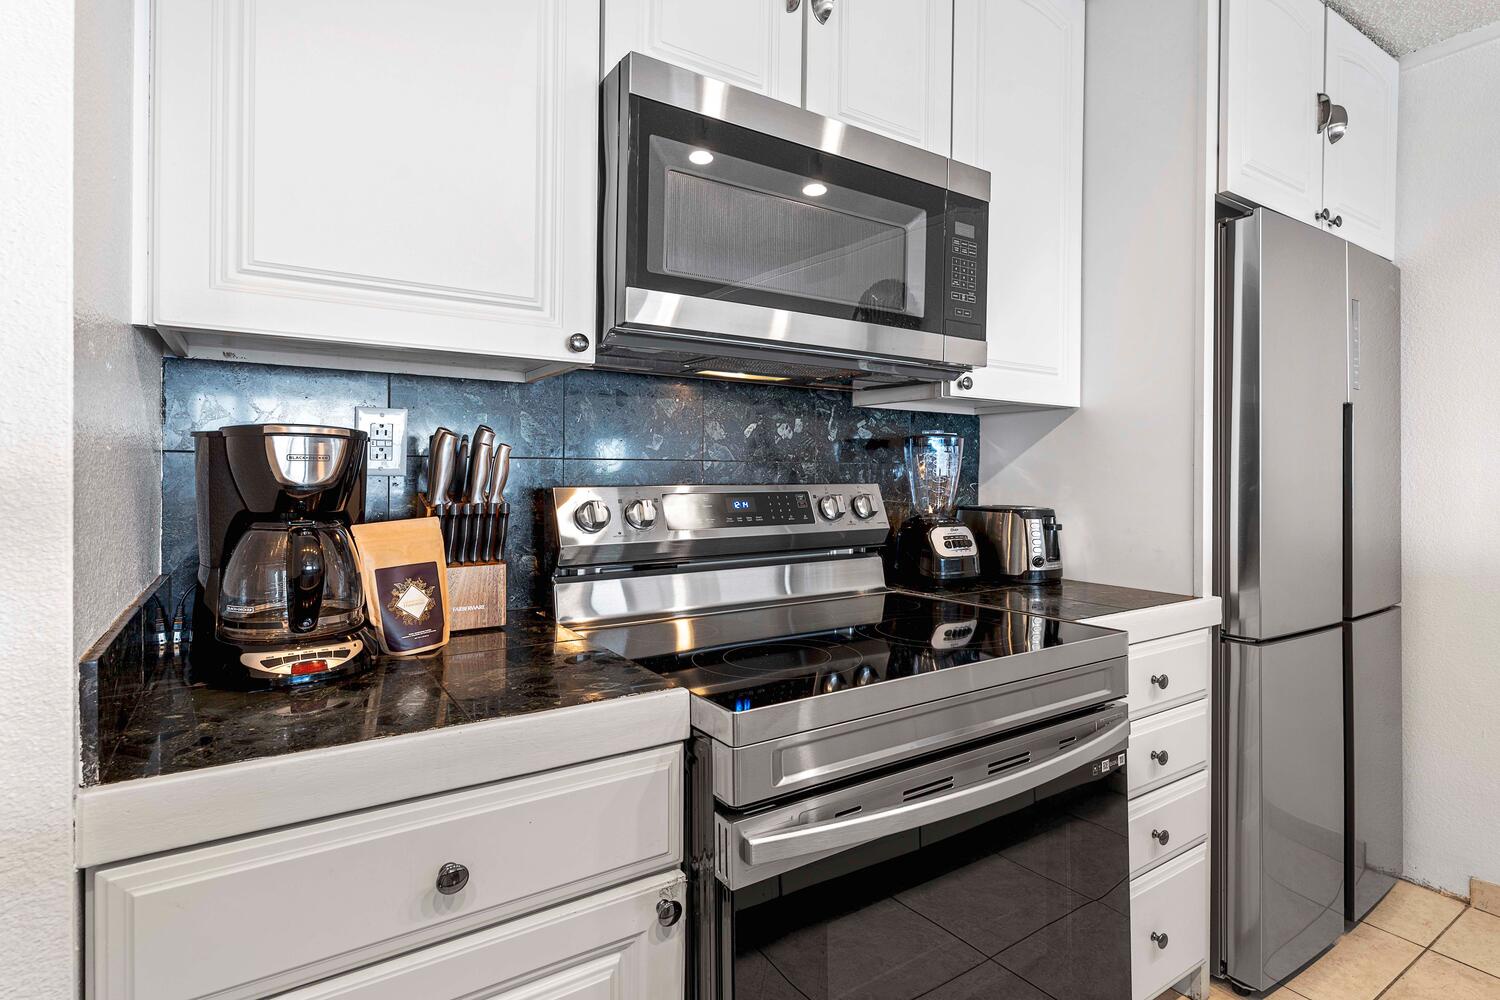 Kailua Kona Vacation Rentals, Kona Reef F23 - The fully stocked kitchen for your culinary adventures!